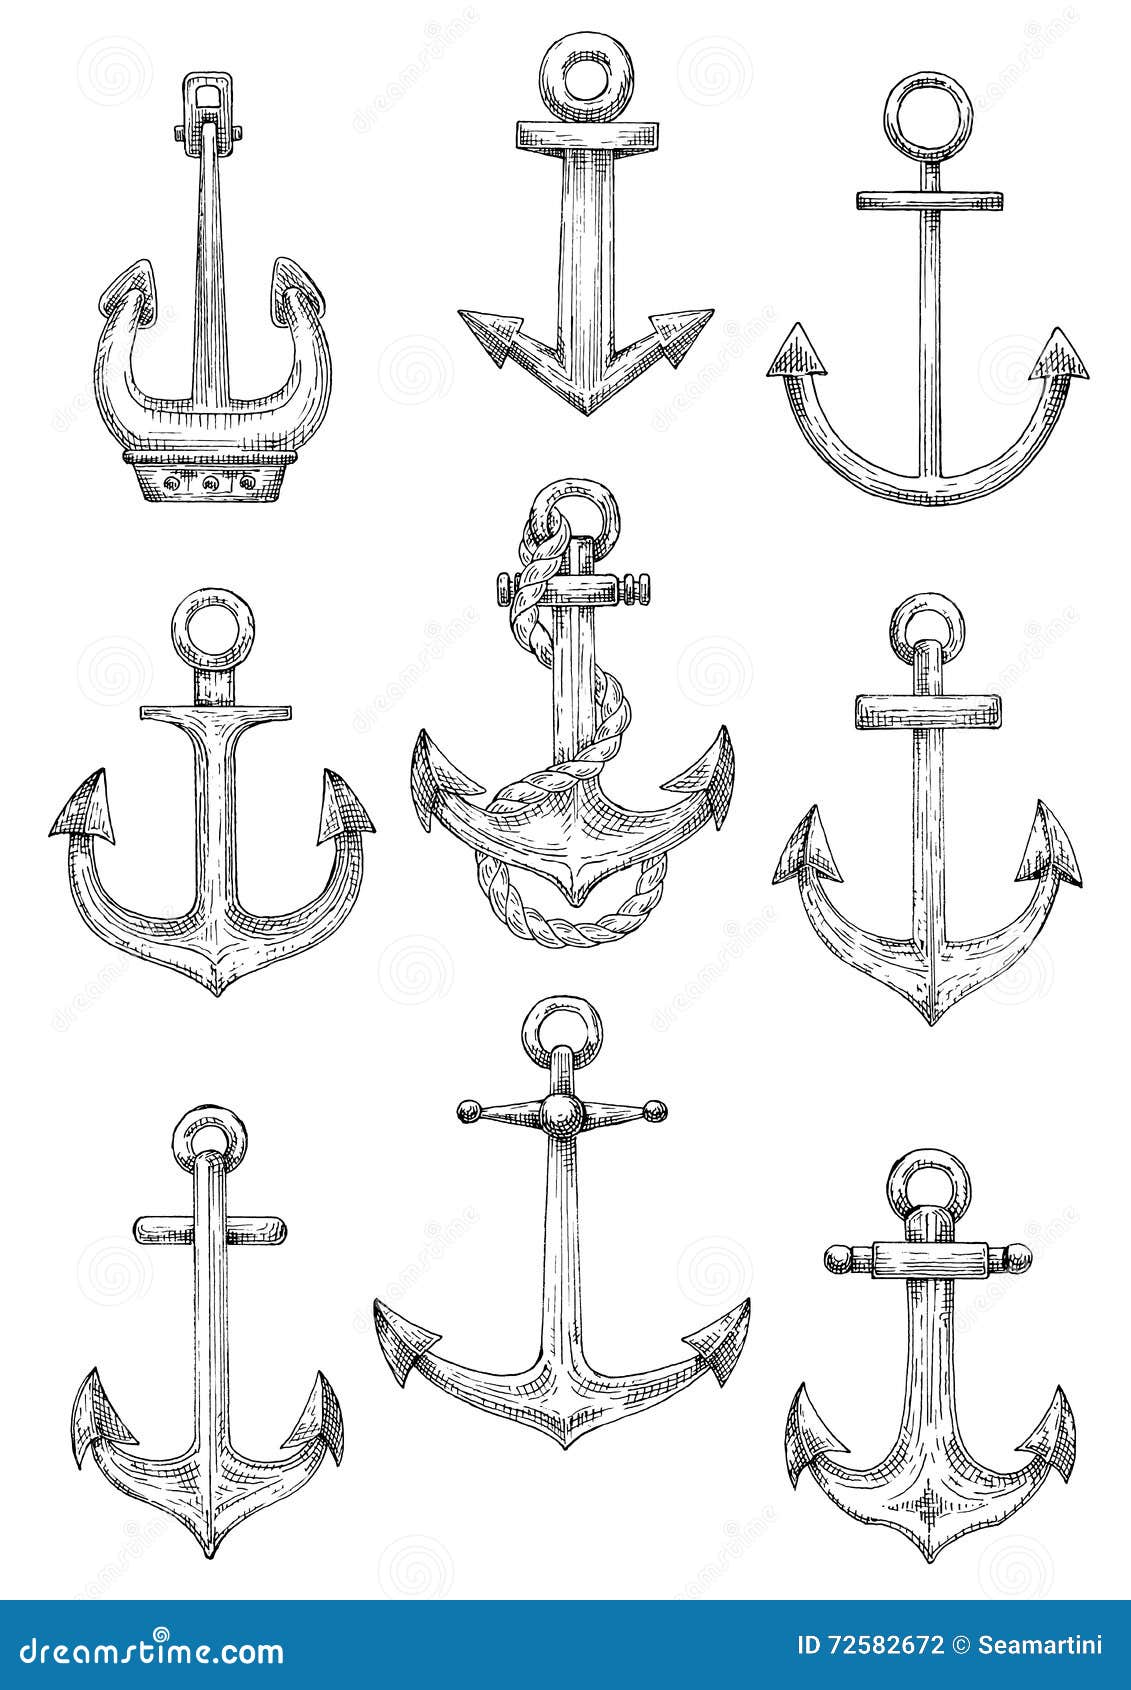 nautical anchors rope marine theme design vintage engraving sketches ships twisted use as navy heraldry themed tattoo 72582672